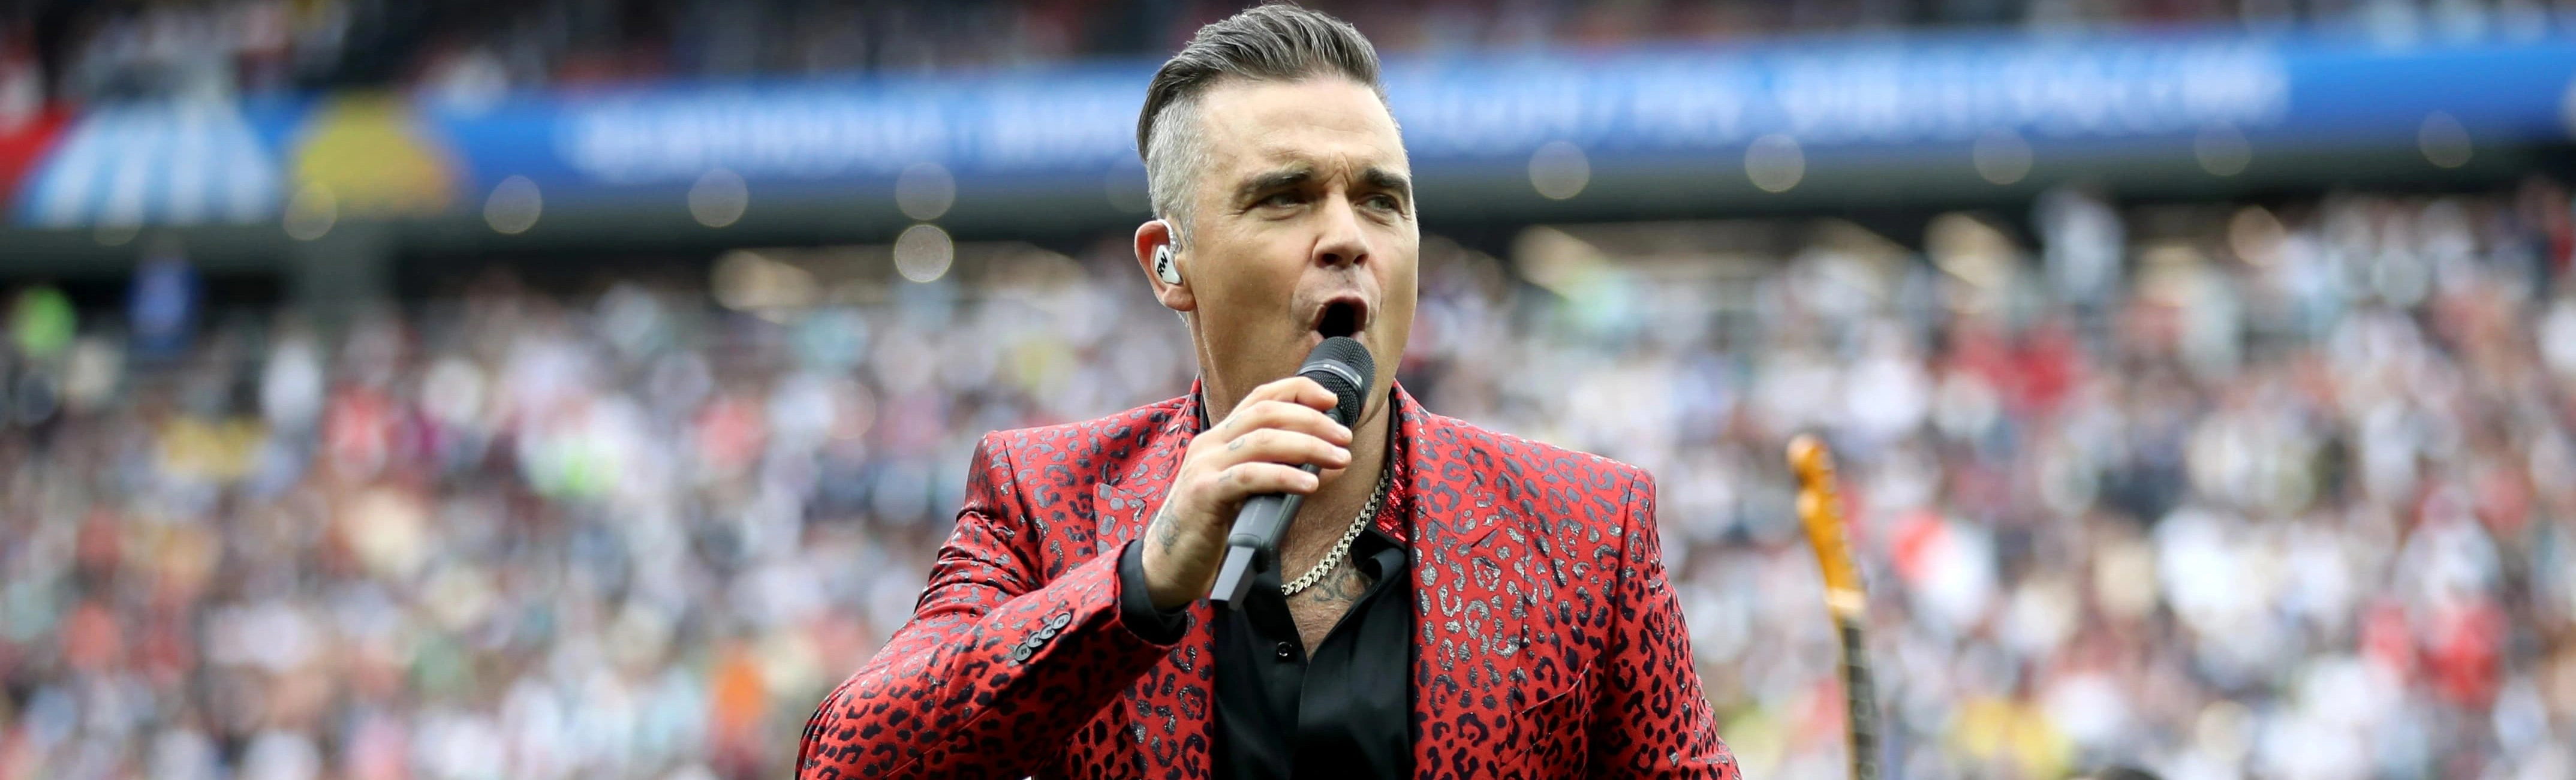 25 years of hits by Robbie Williams: Don't miss the exciting concert at the Etihad Arena!